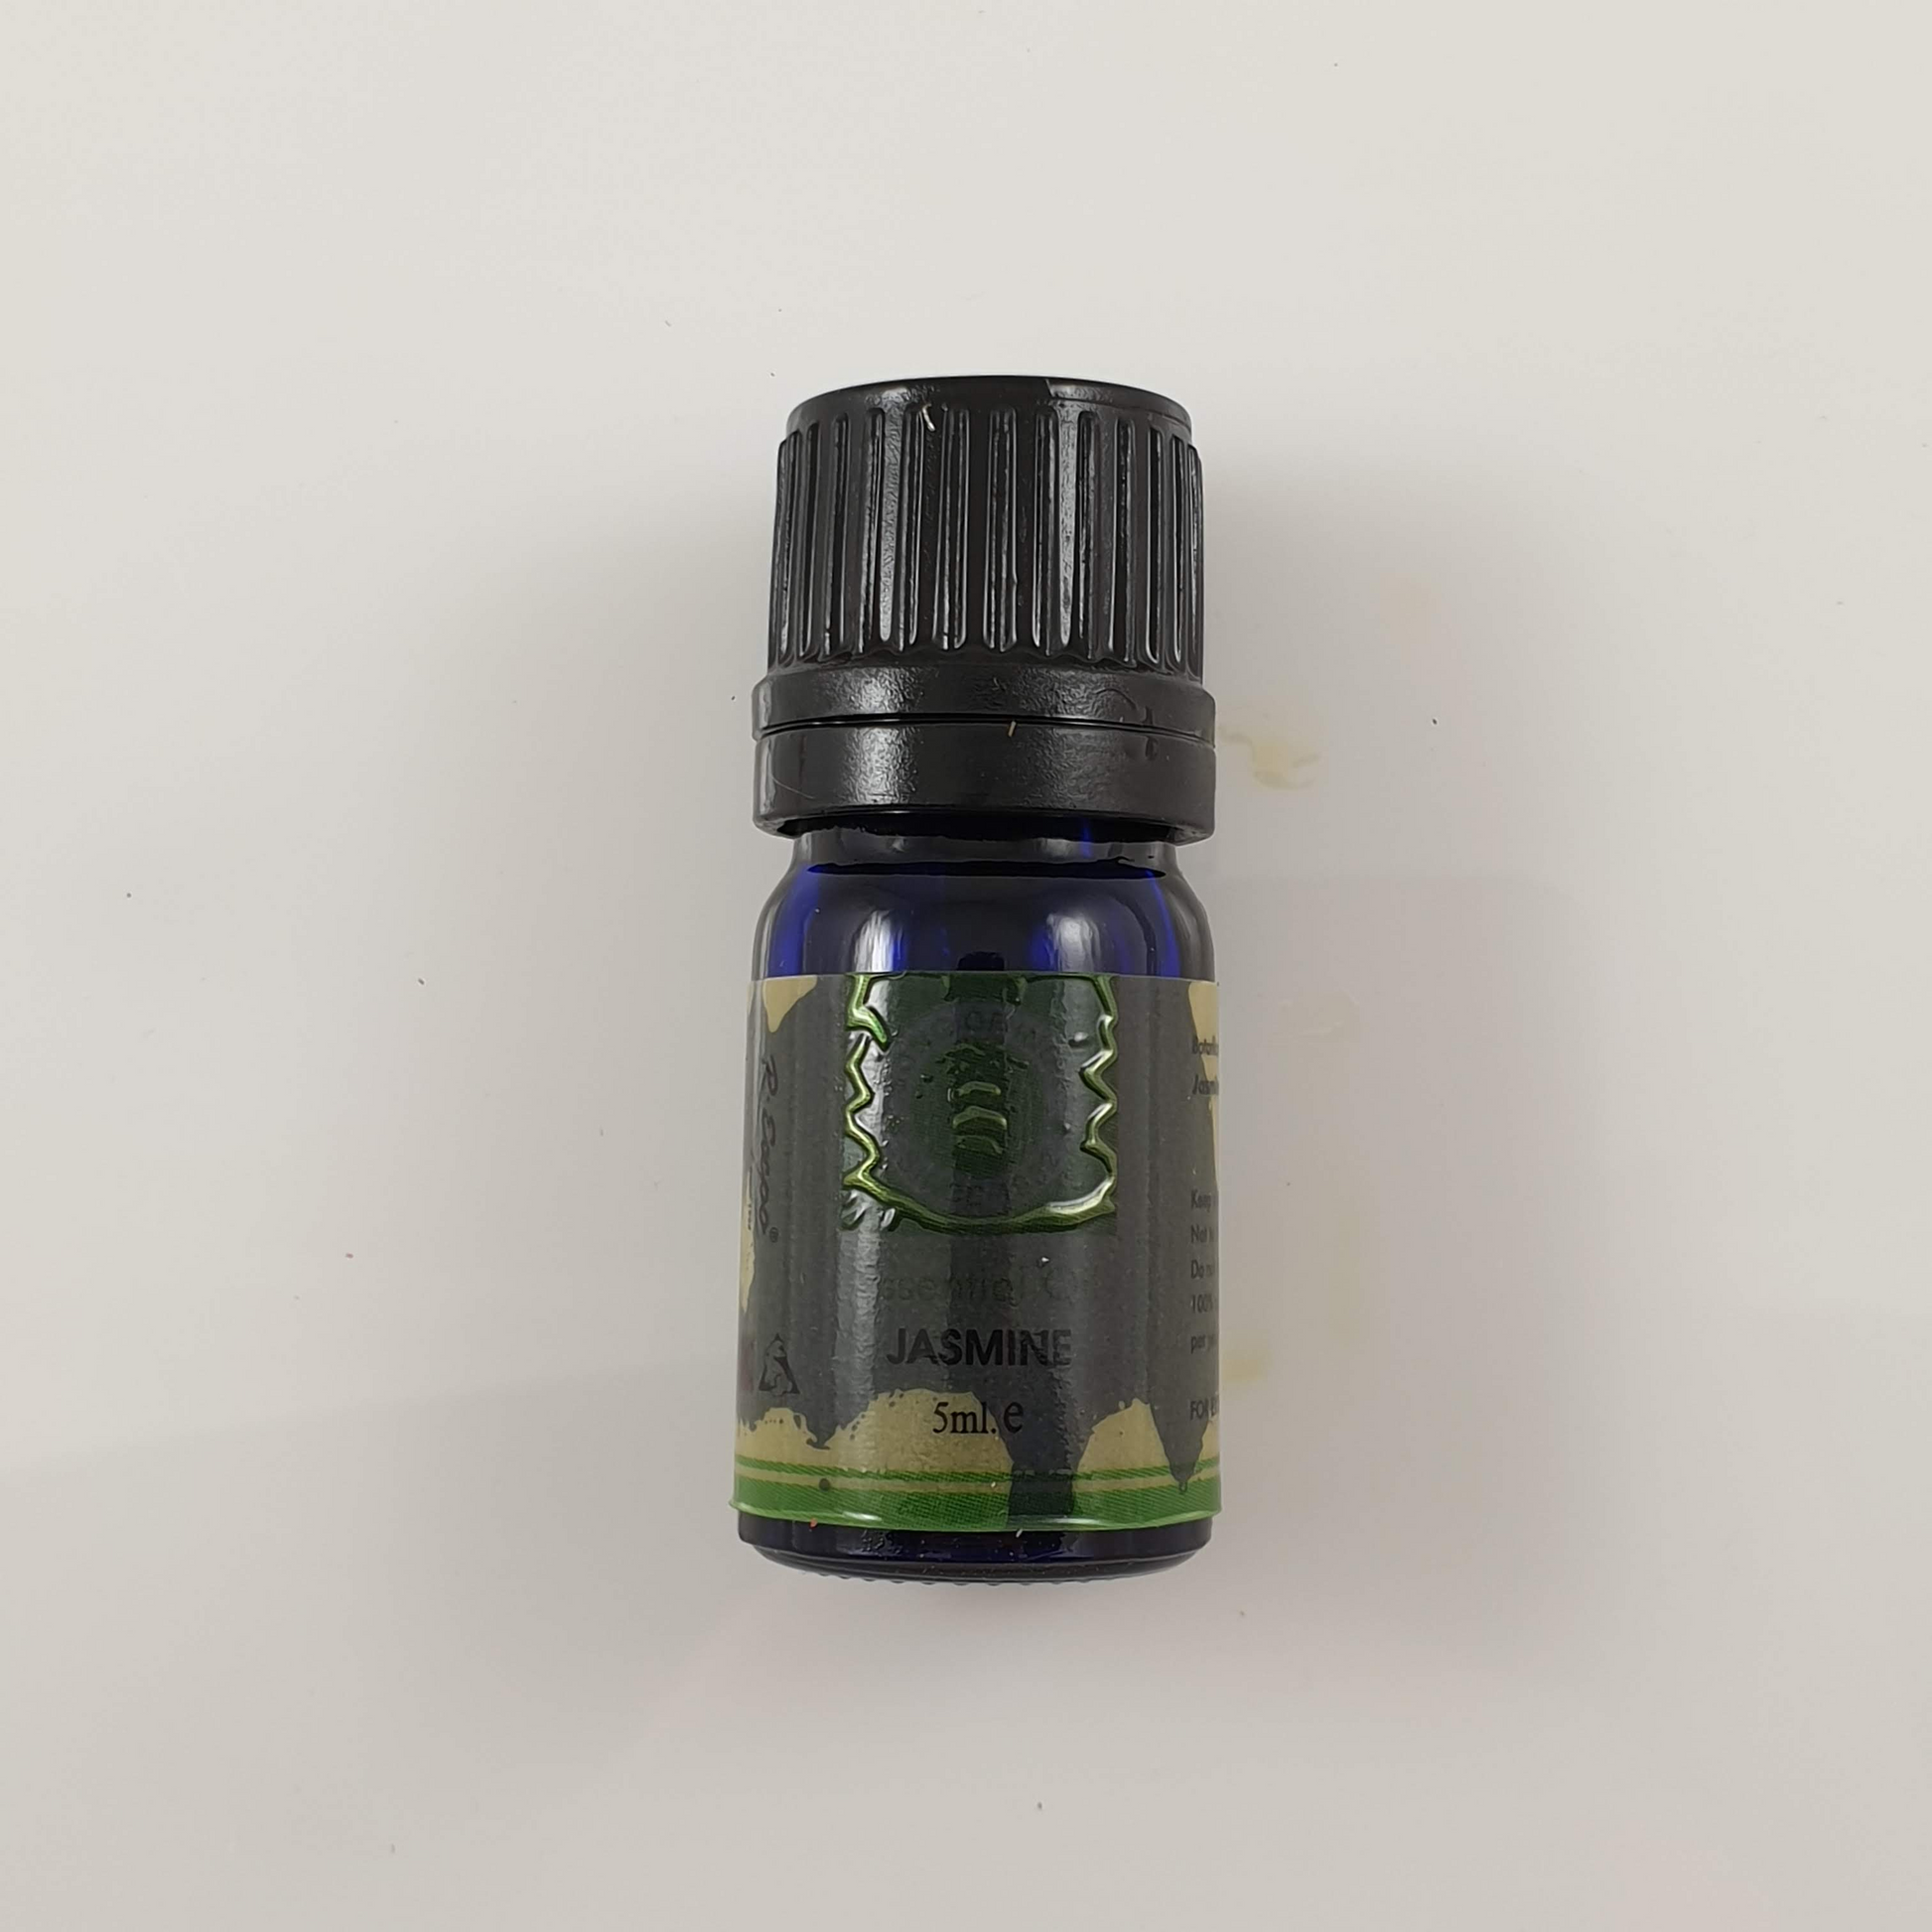 Song of India Essential Oil - Jasmine 5ml - Rivendell Shop